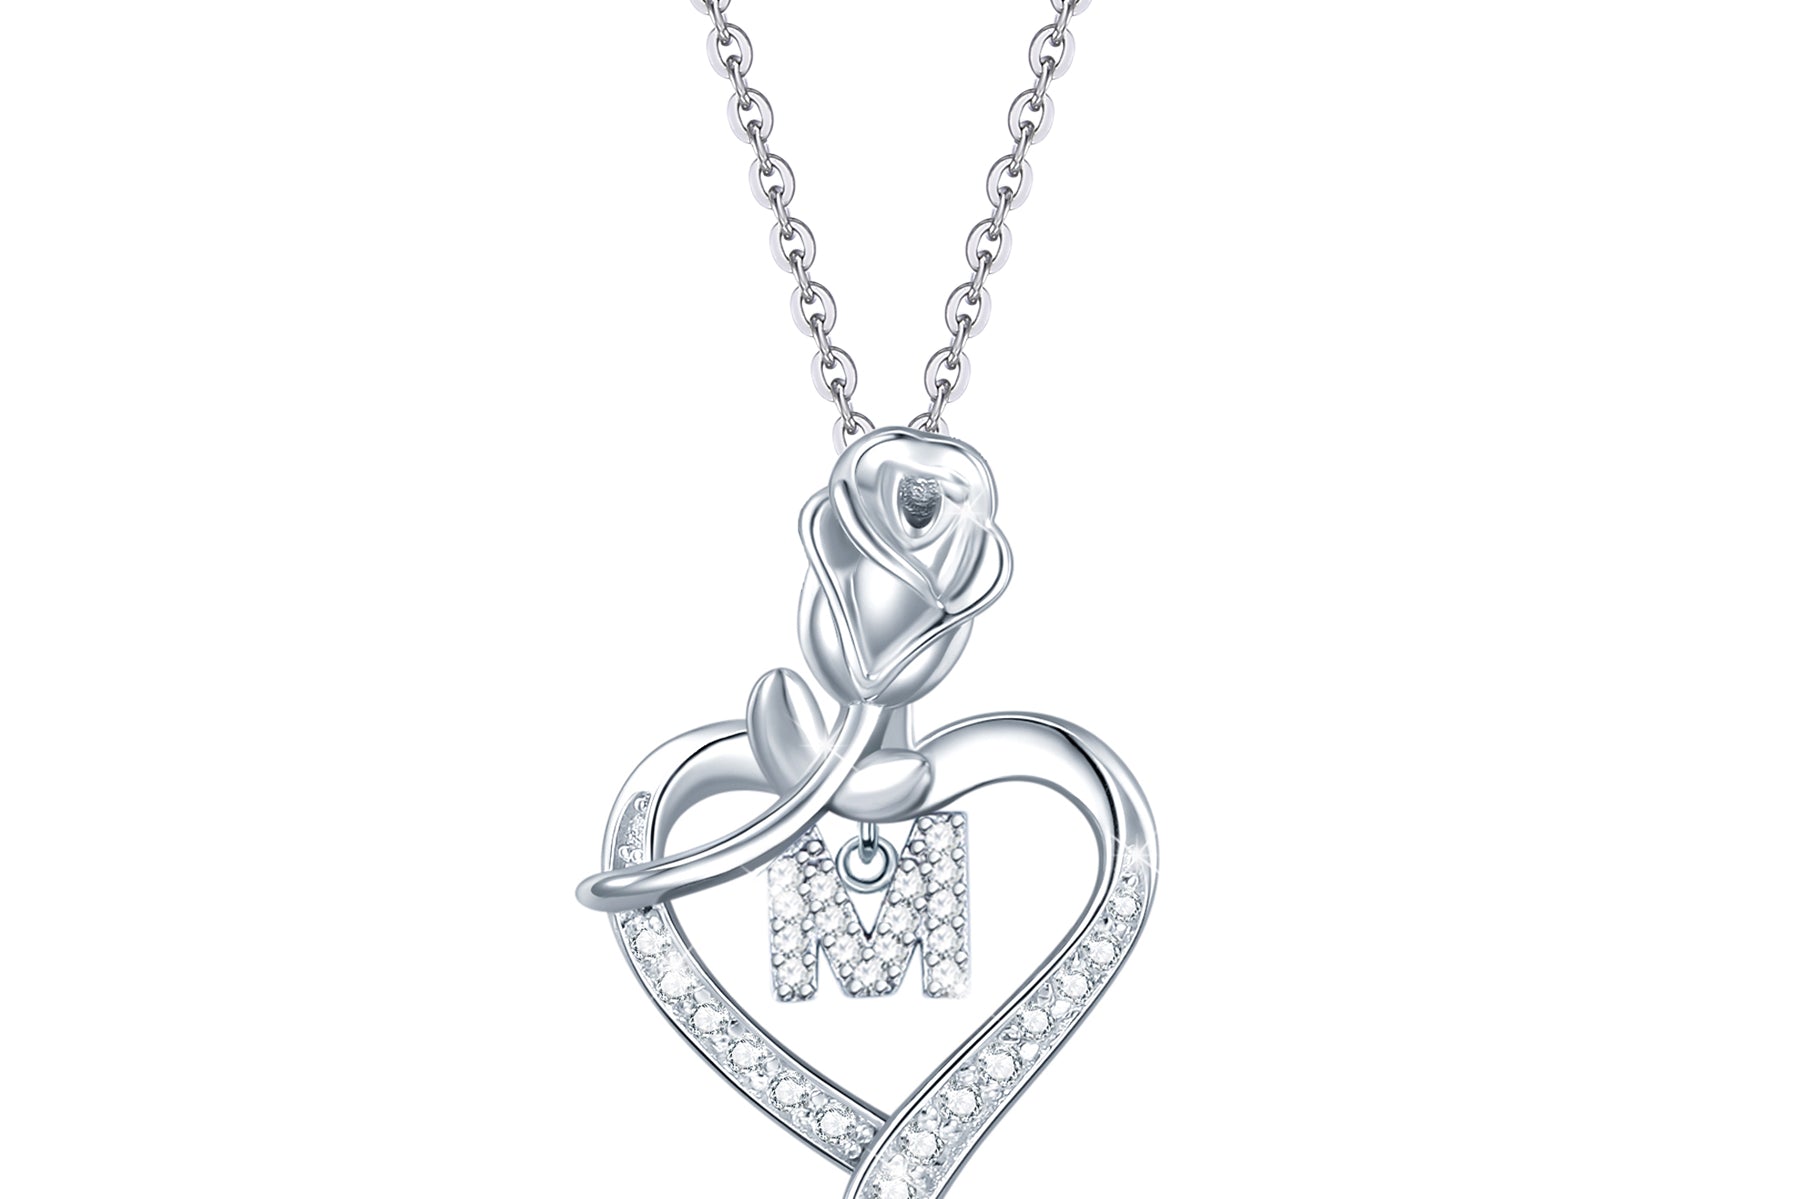 Agvana Initial Rose Flower Heart Letter Sterling Silver Pendant Necklace